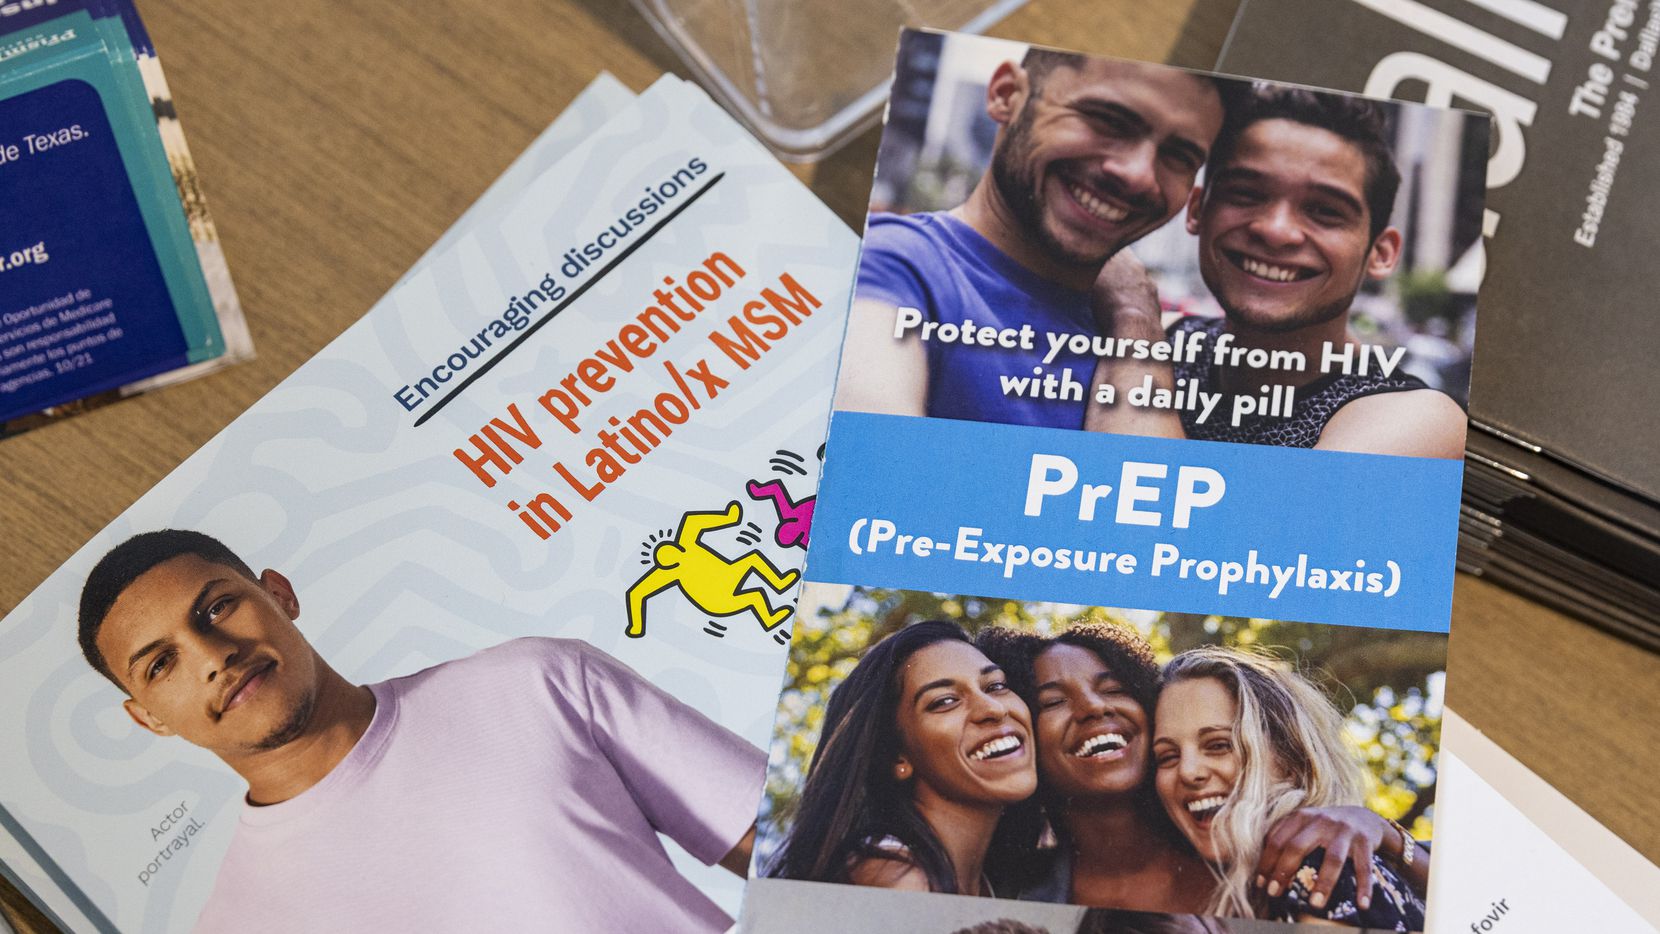 Pamphlets about using PrEP (pre-exposure prophylaxis) medication to prevent HIV at Prism...